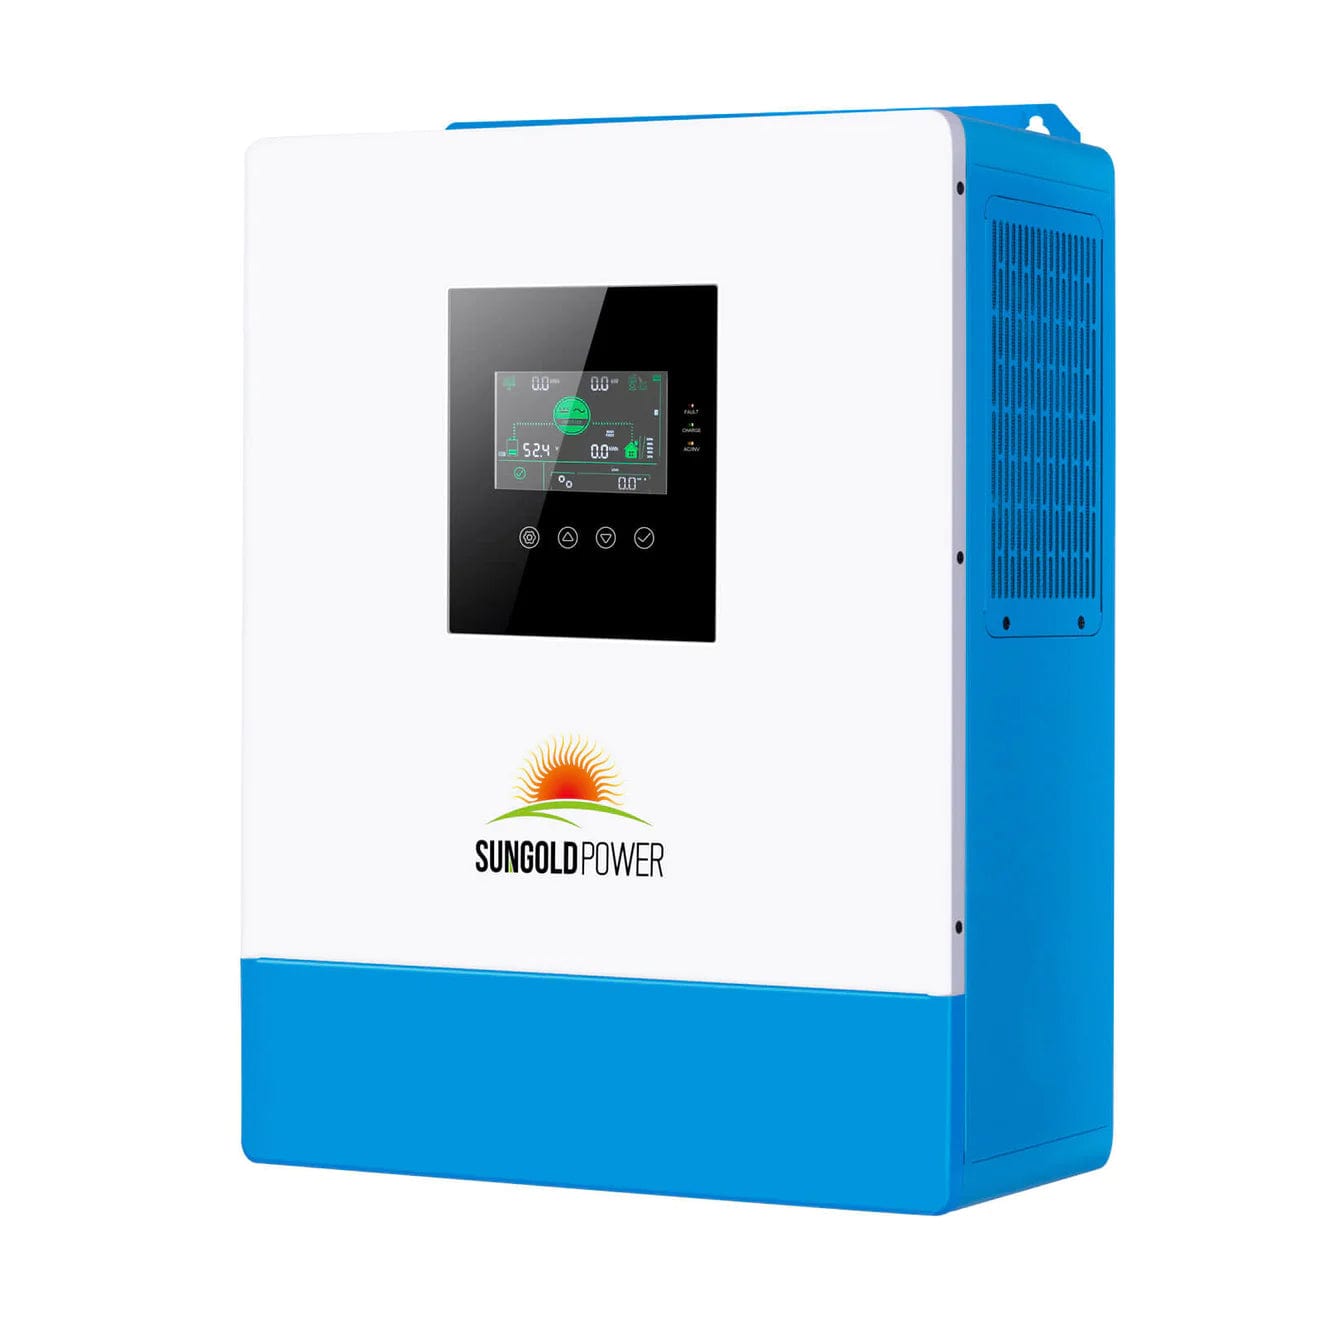 SunGoldPower 5000W 48V SOLAR CHARGER INVERTER